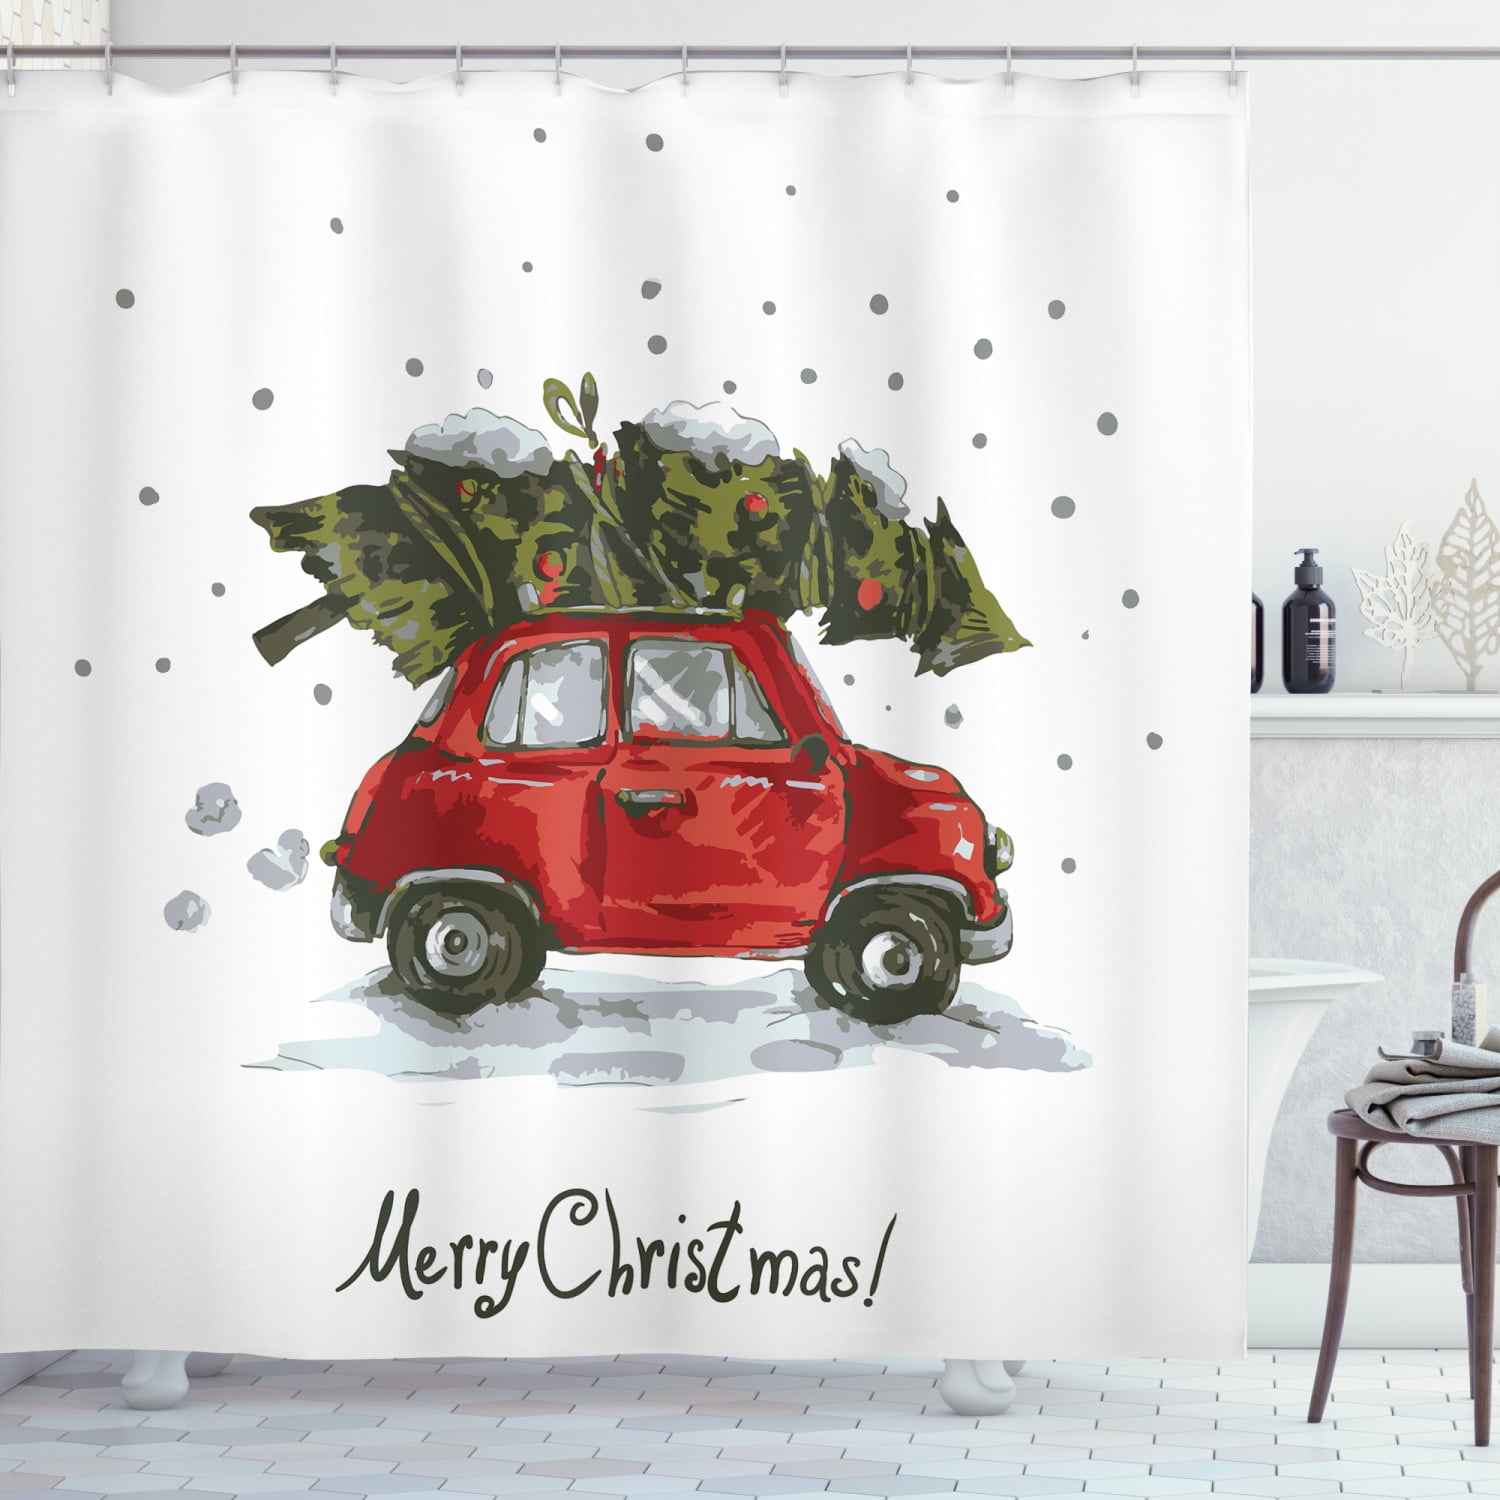 CHRISTMAS FABRIC SHOWER CURTAIN 13 Piece Set CLASSIC RED CAR AND TREES 